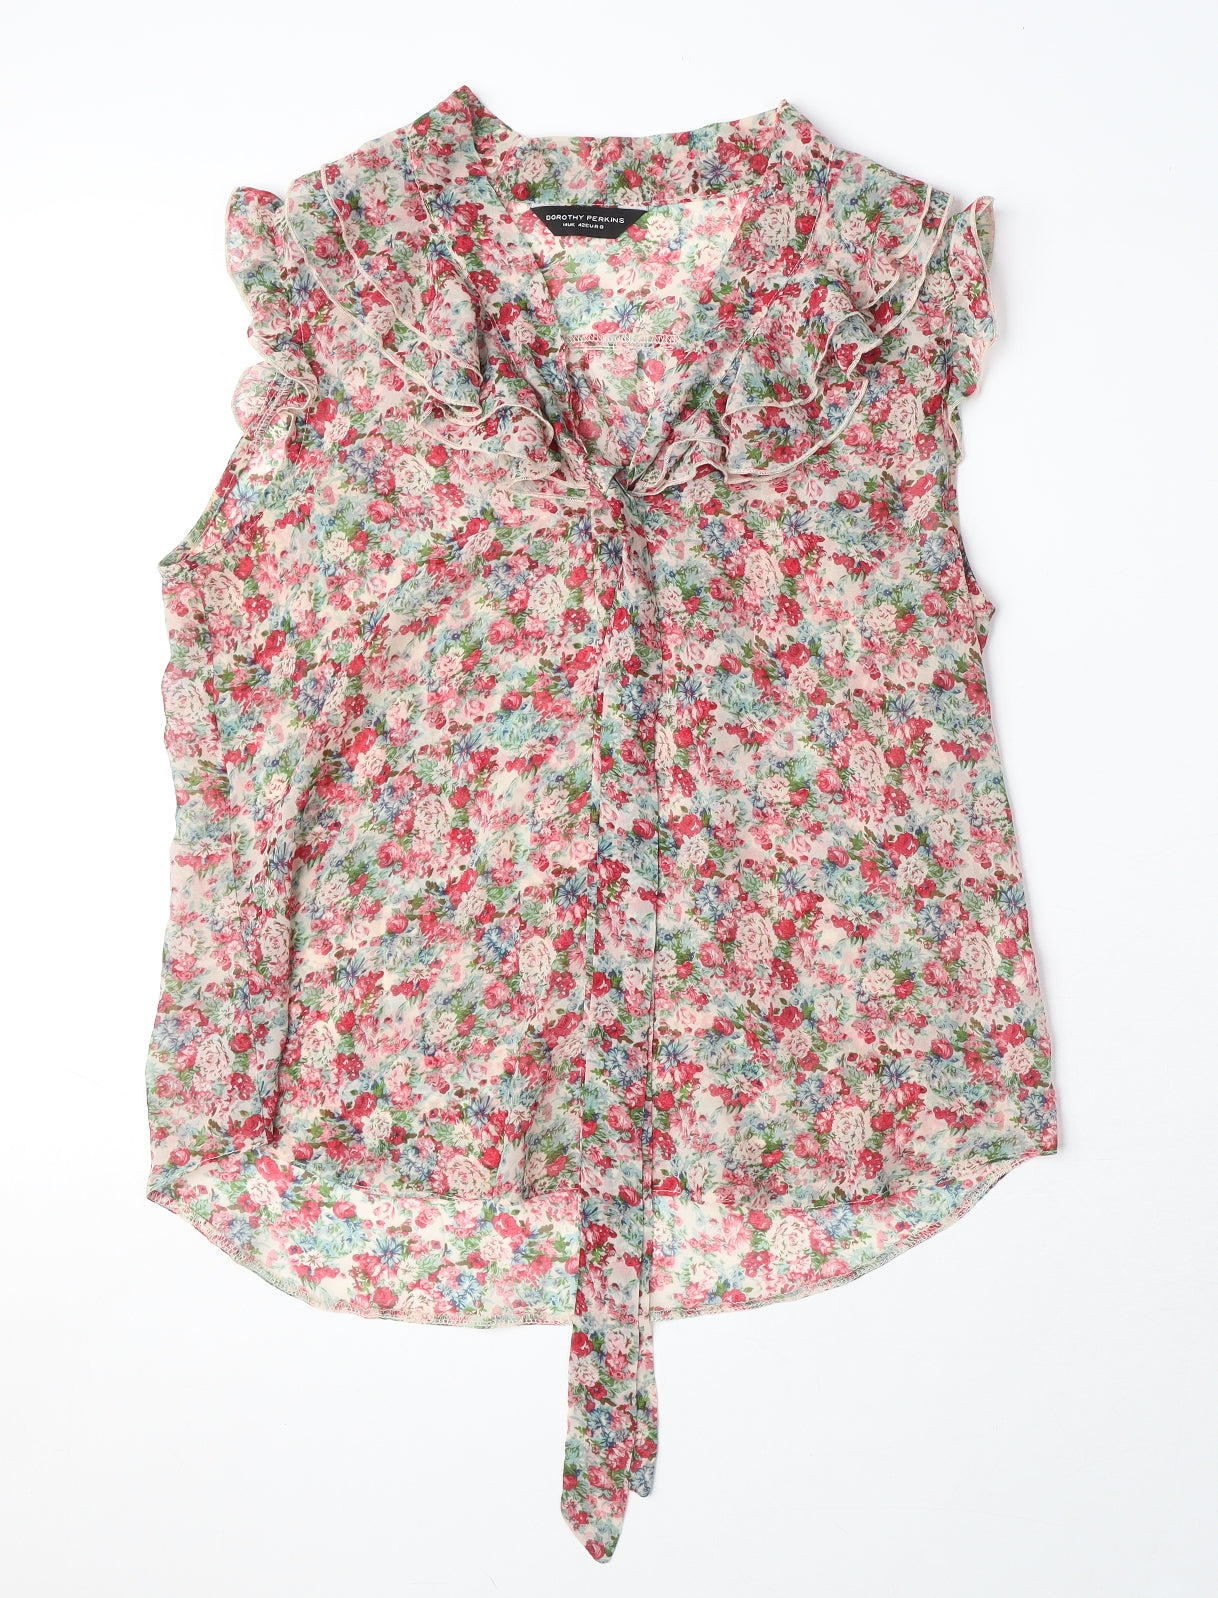 Dorothy Perkins Womens Multicoloured Floral Polyester Basic Blouse Size 14 V-Neck - Ruffle Detail